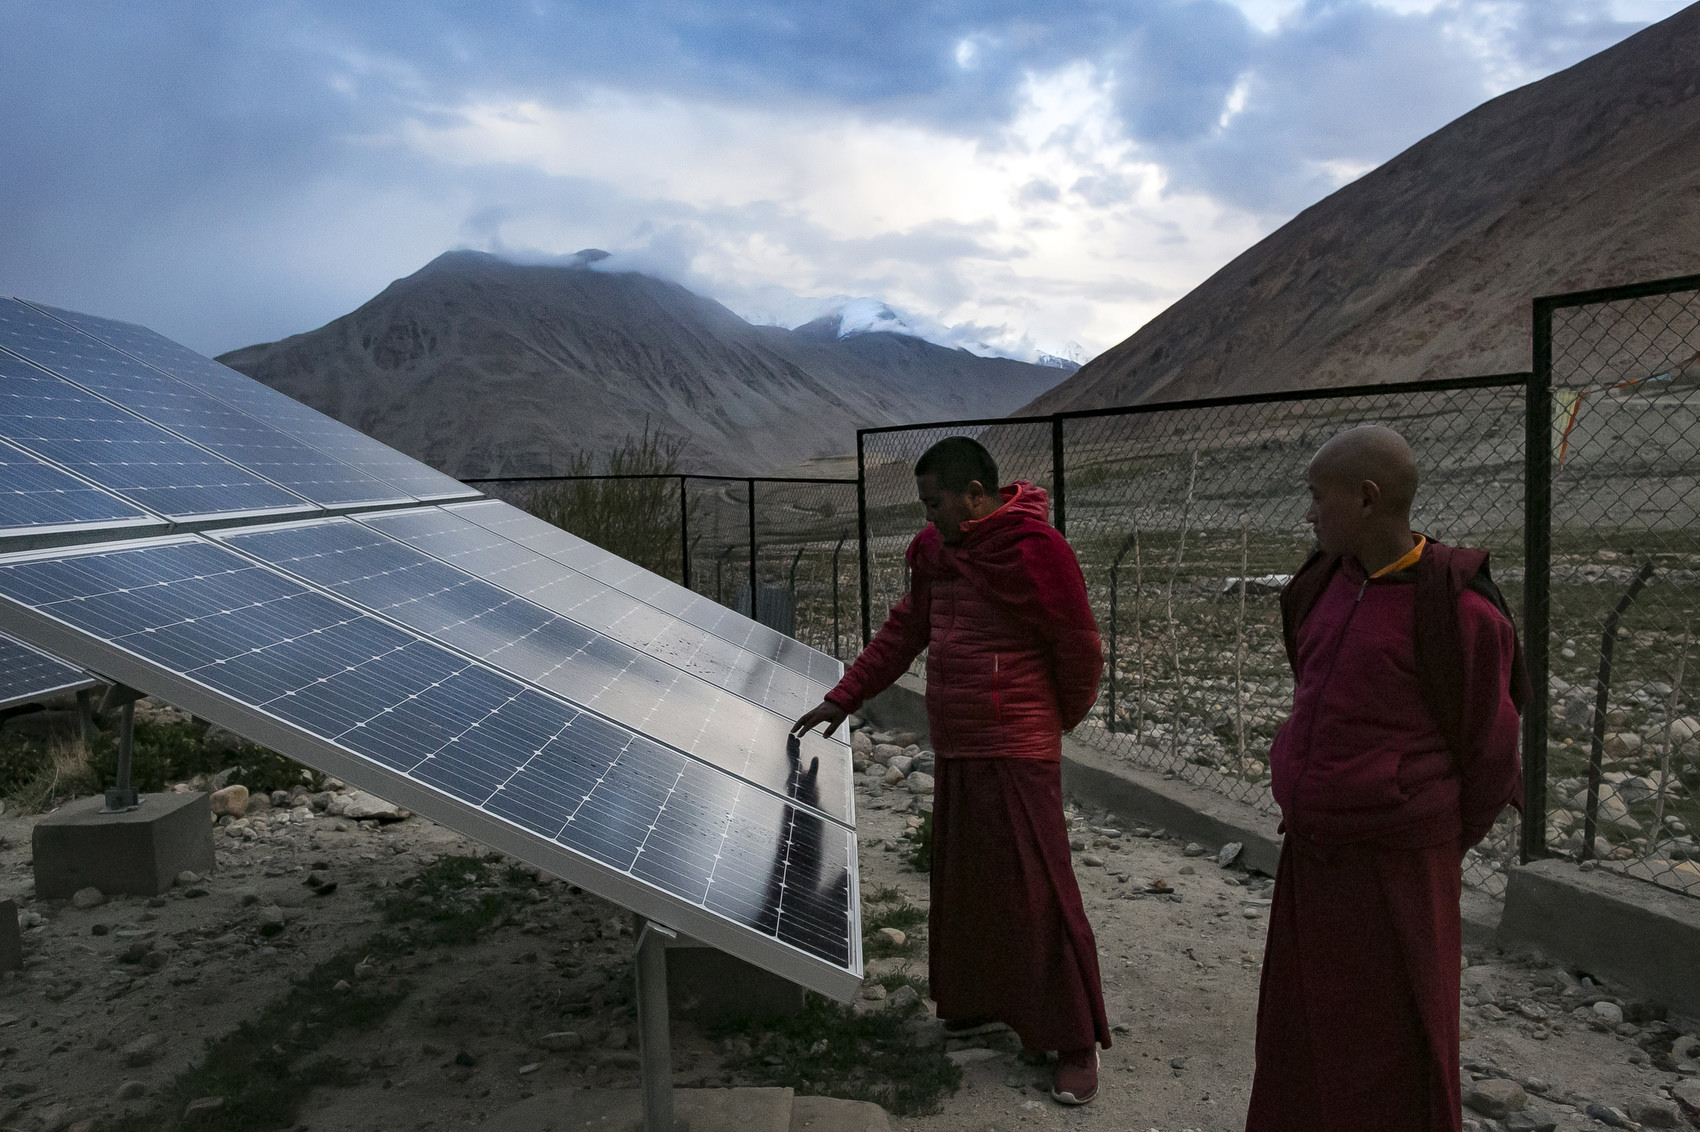 Monks touch solar panels at the Shachukul Monastery, of which the dormitory and school are reliant on solar energy, in Chosling village in Ladakh, India. Speaking two days after US President Donald Trump announced plans to withdraw from the Paris agreement on climate change, Indian Prime Minister Narendra Modi said that India was “part of the world’s shared heritage” and that India would “continue working...above and beyond the Paris accord”. India saw nearly $10 billion invested, both in 2015 and in 2016, in renewable energy projects.  (Photo by Allison Joyce/Getty Images)